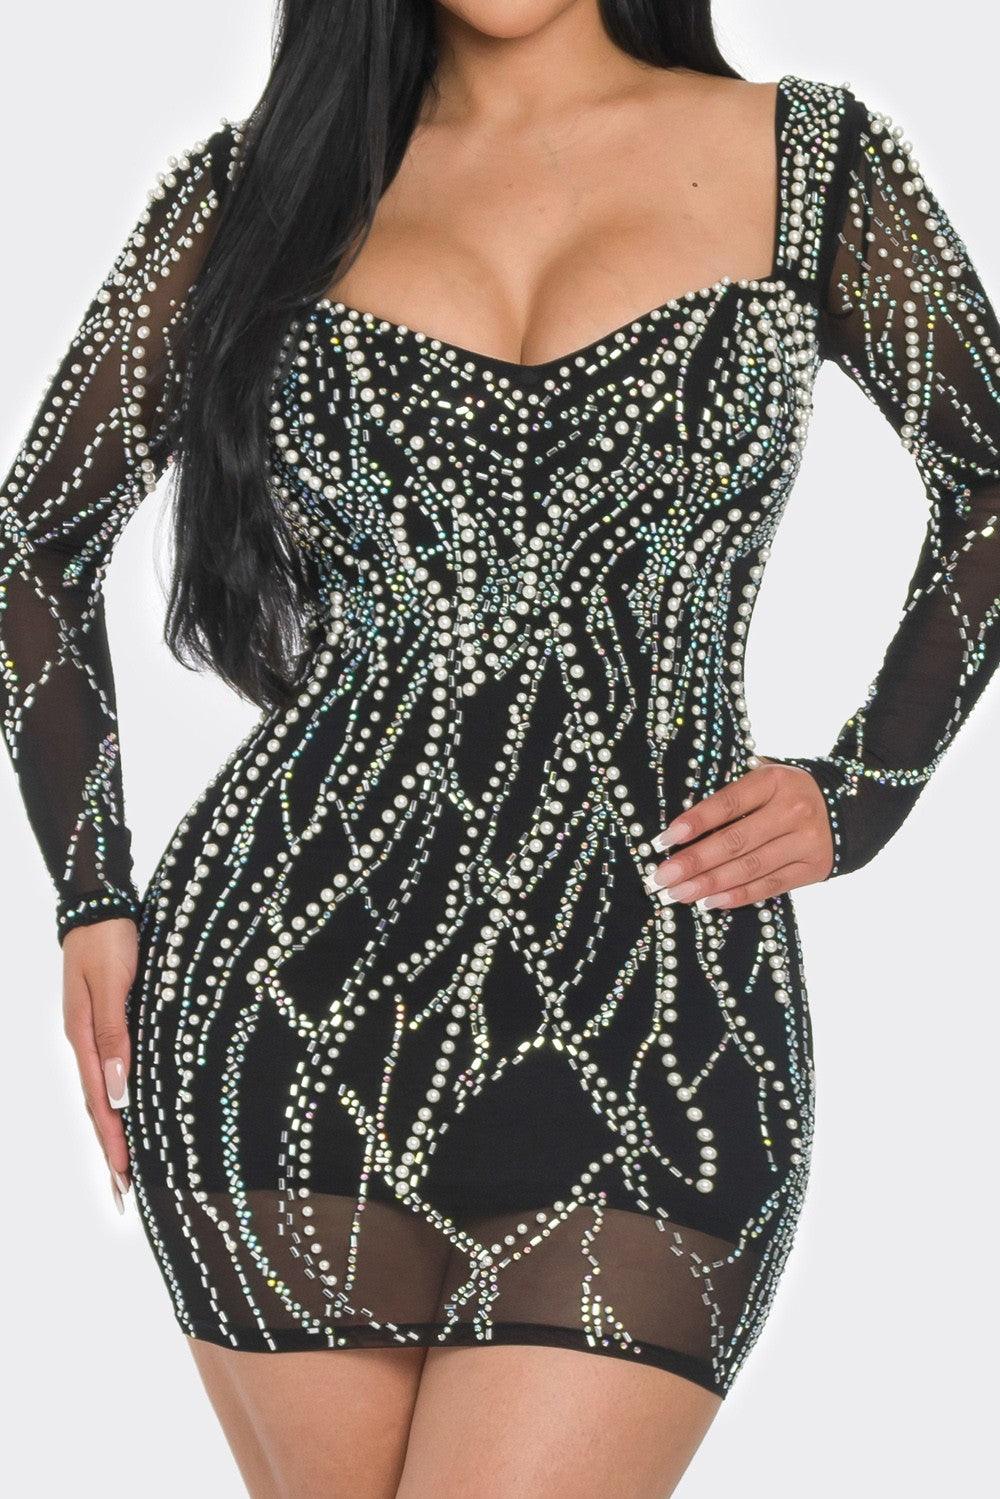 sheer long sleeve rhinestone & pearl mini dress - RK Collections Boutique